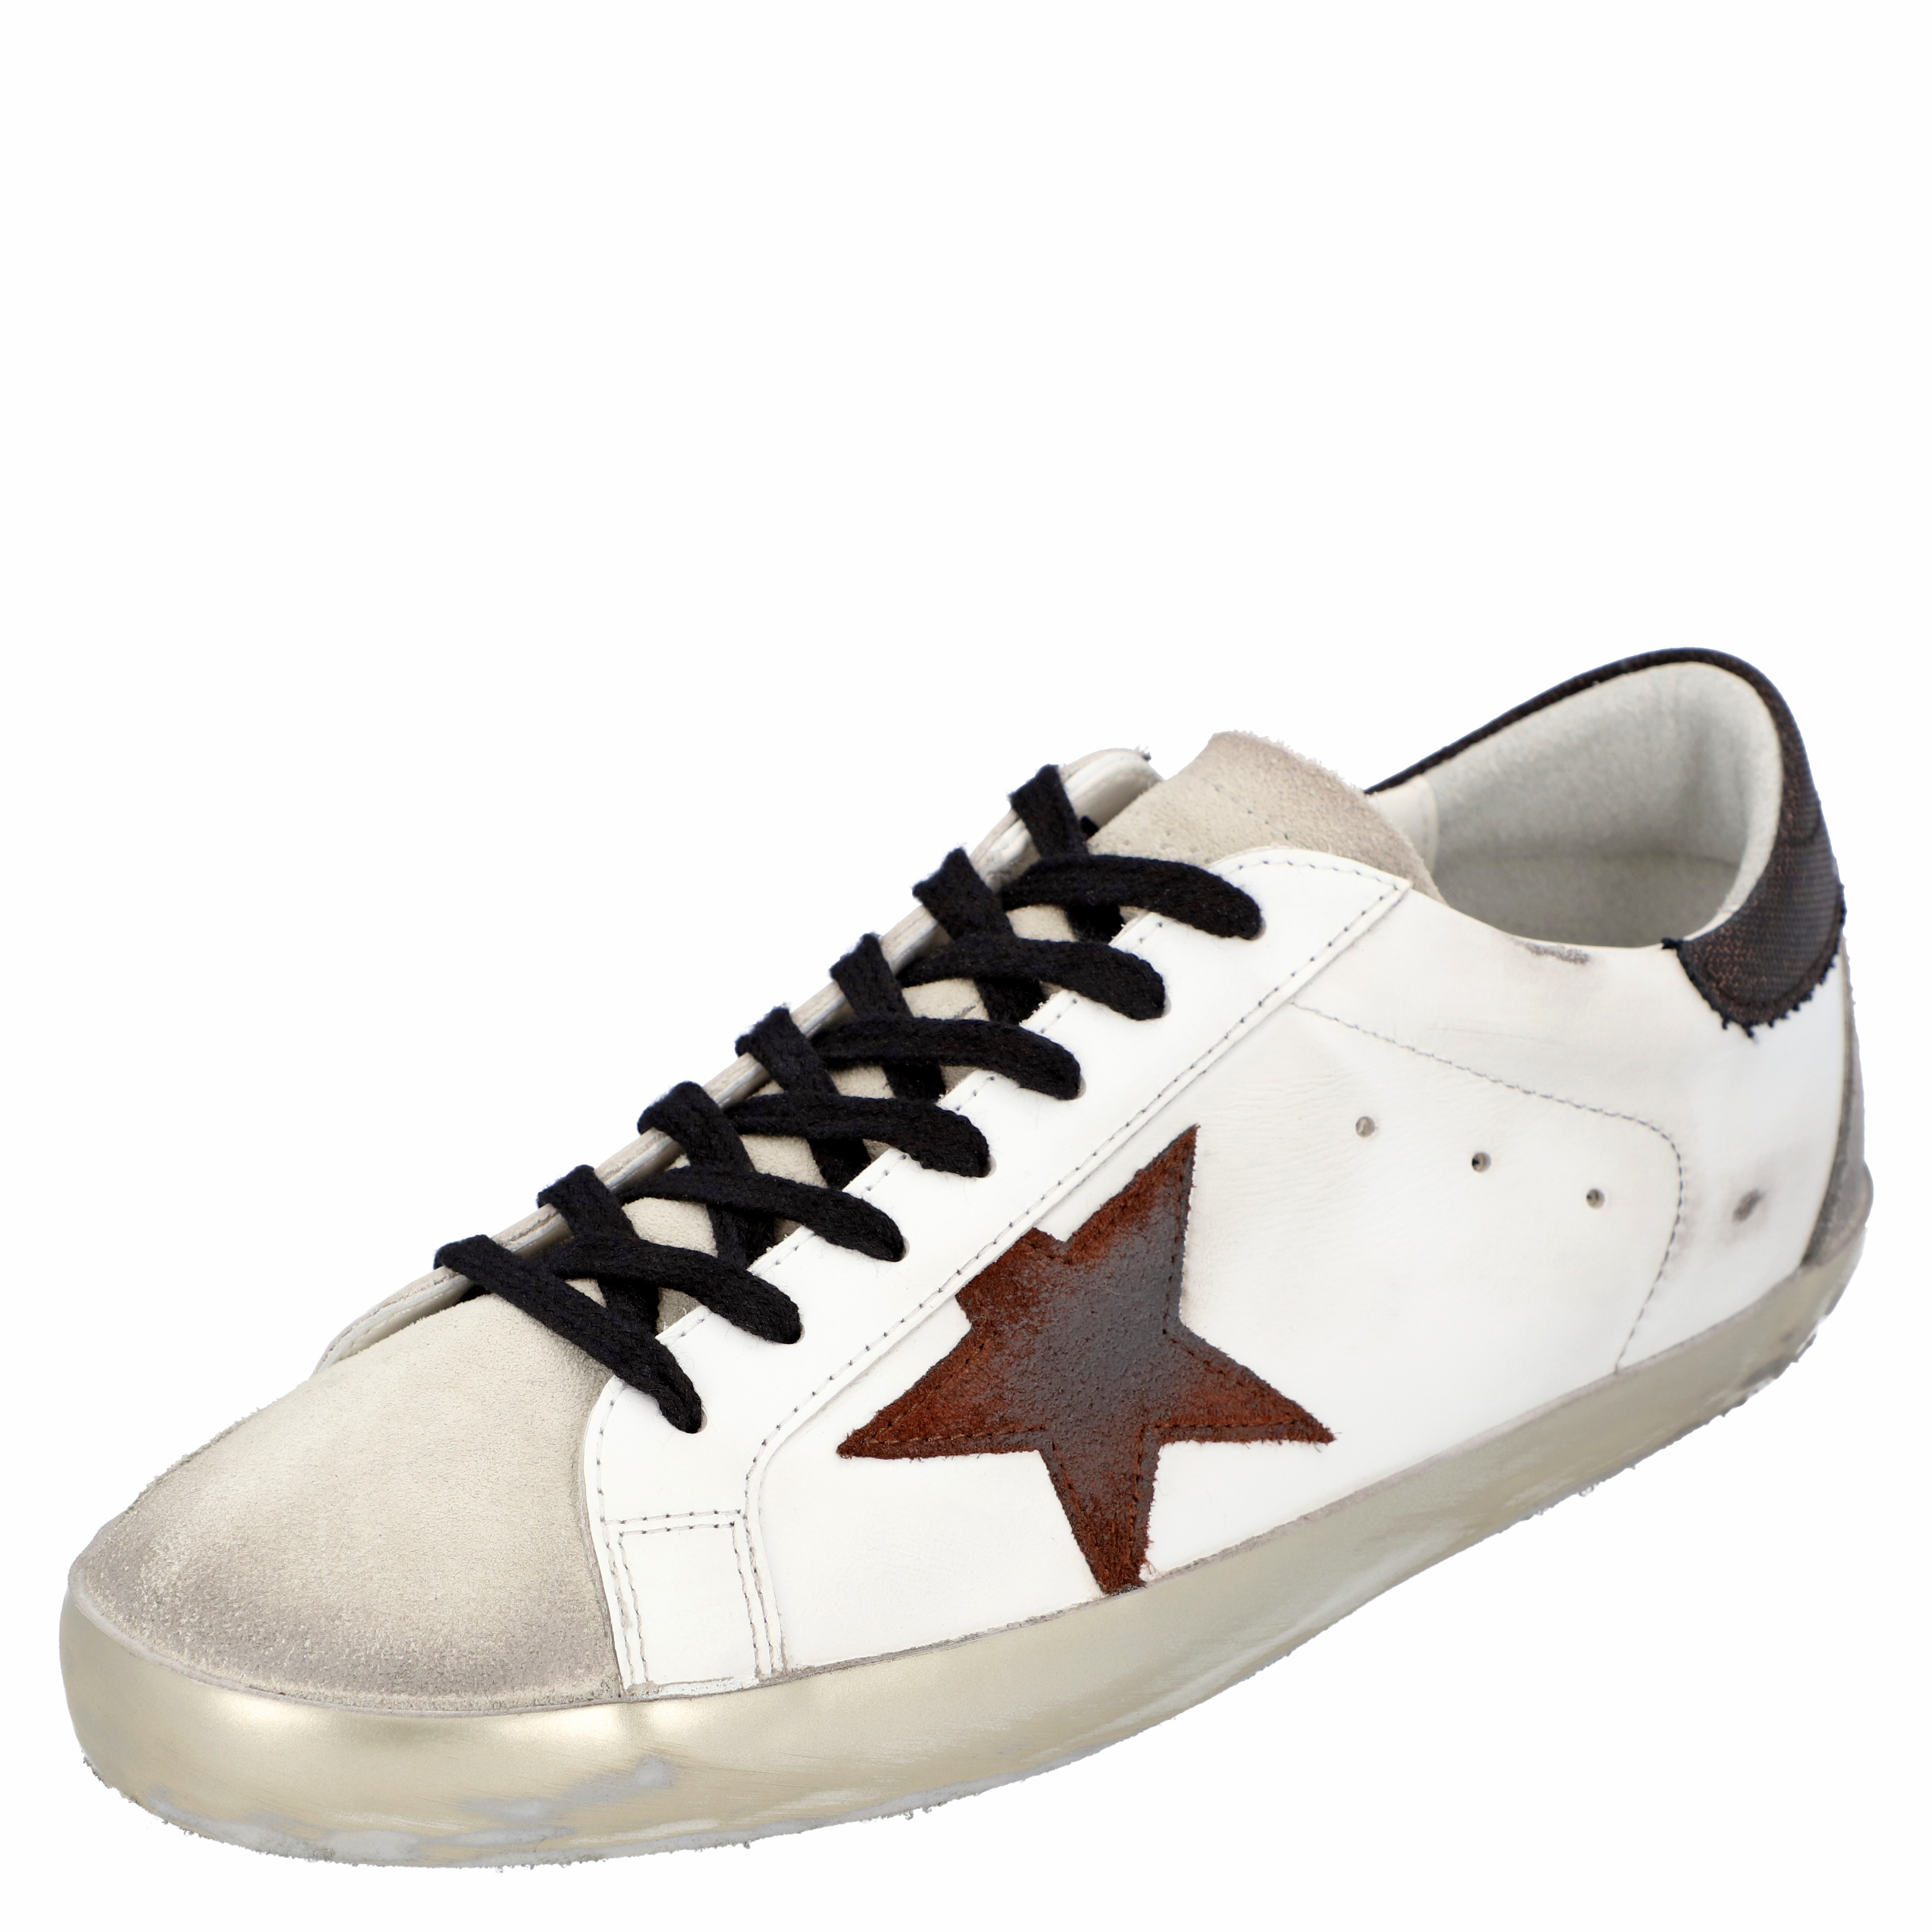 Golden Goose White/Black/Red Leather Superstar Sneakers Size EU 40